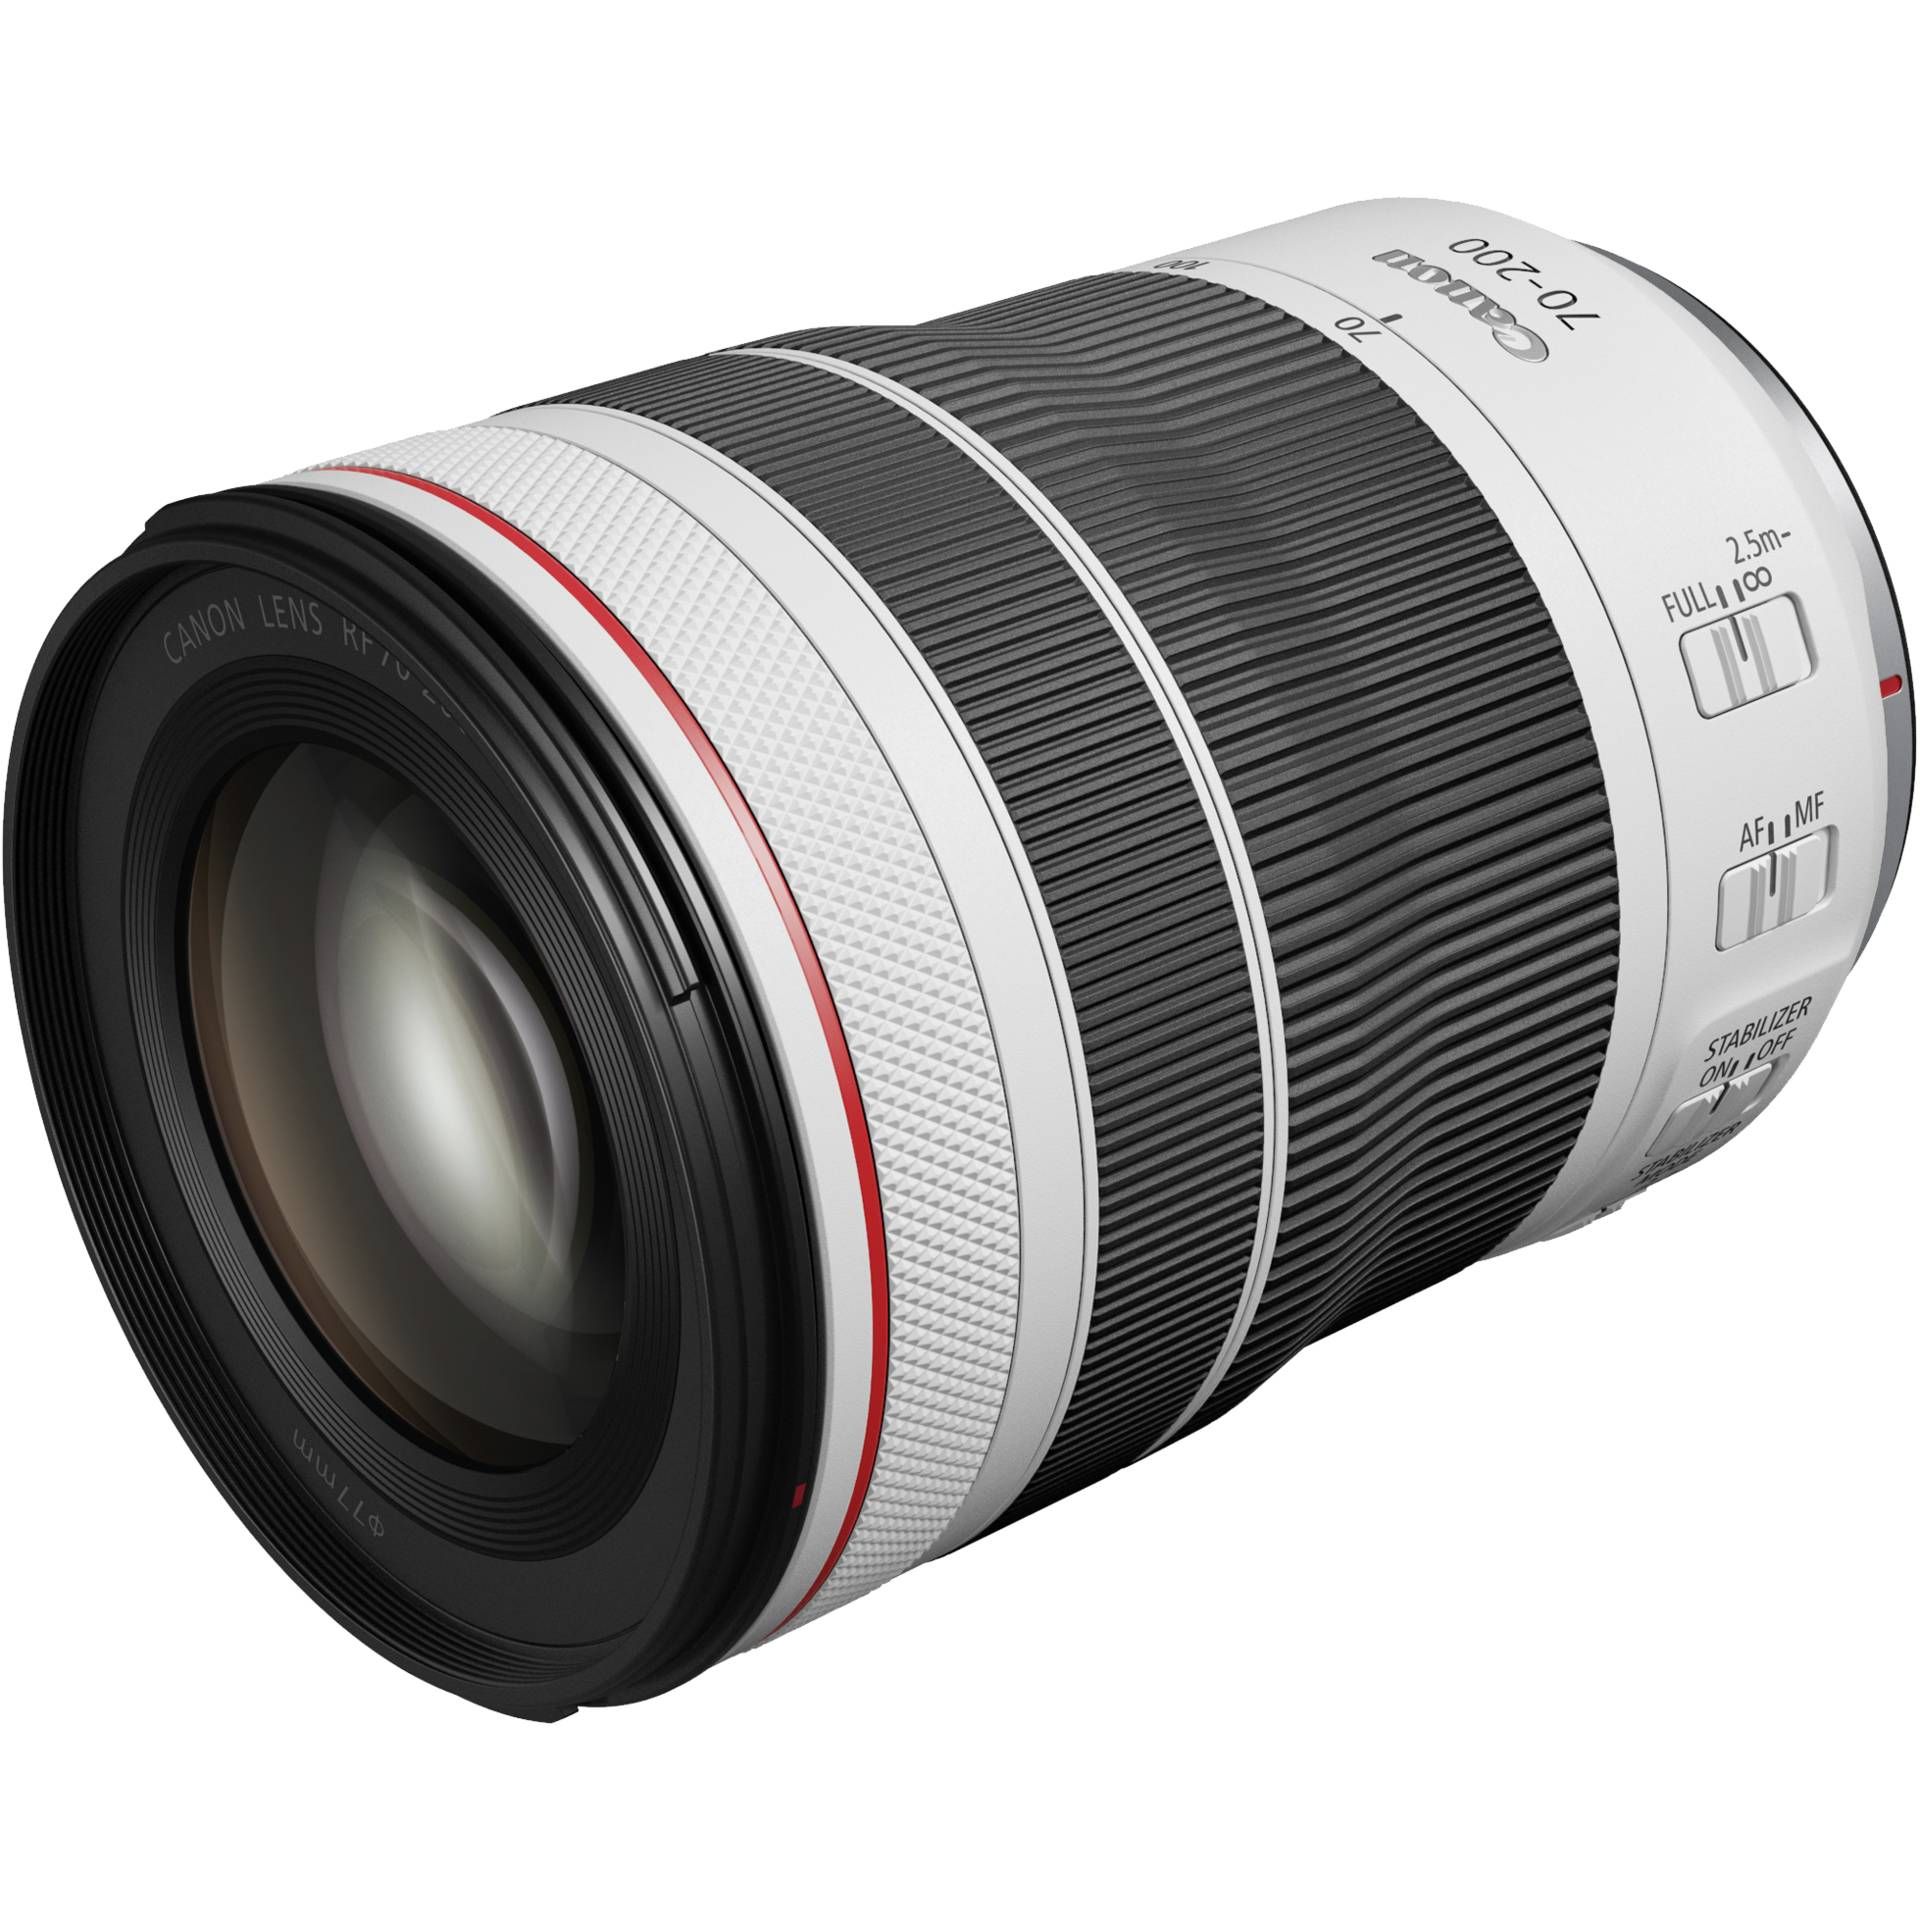 Canon RF 4/70-200 L IS USM